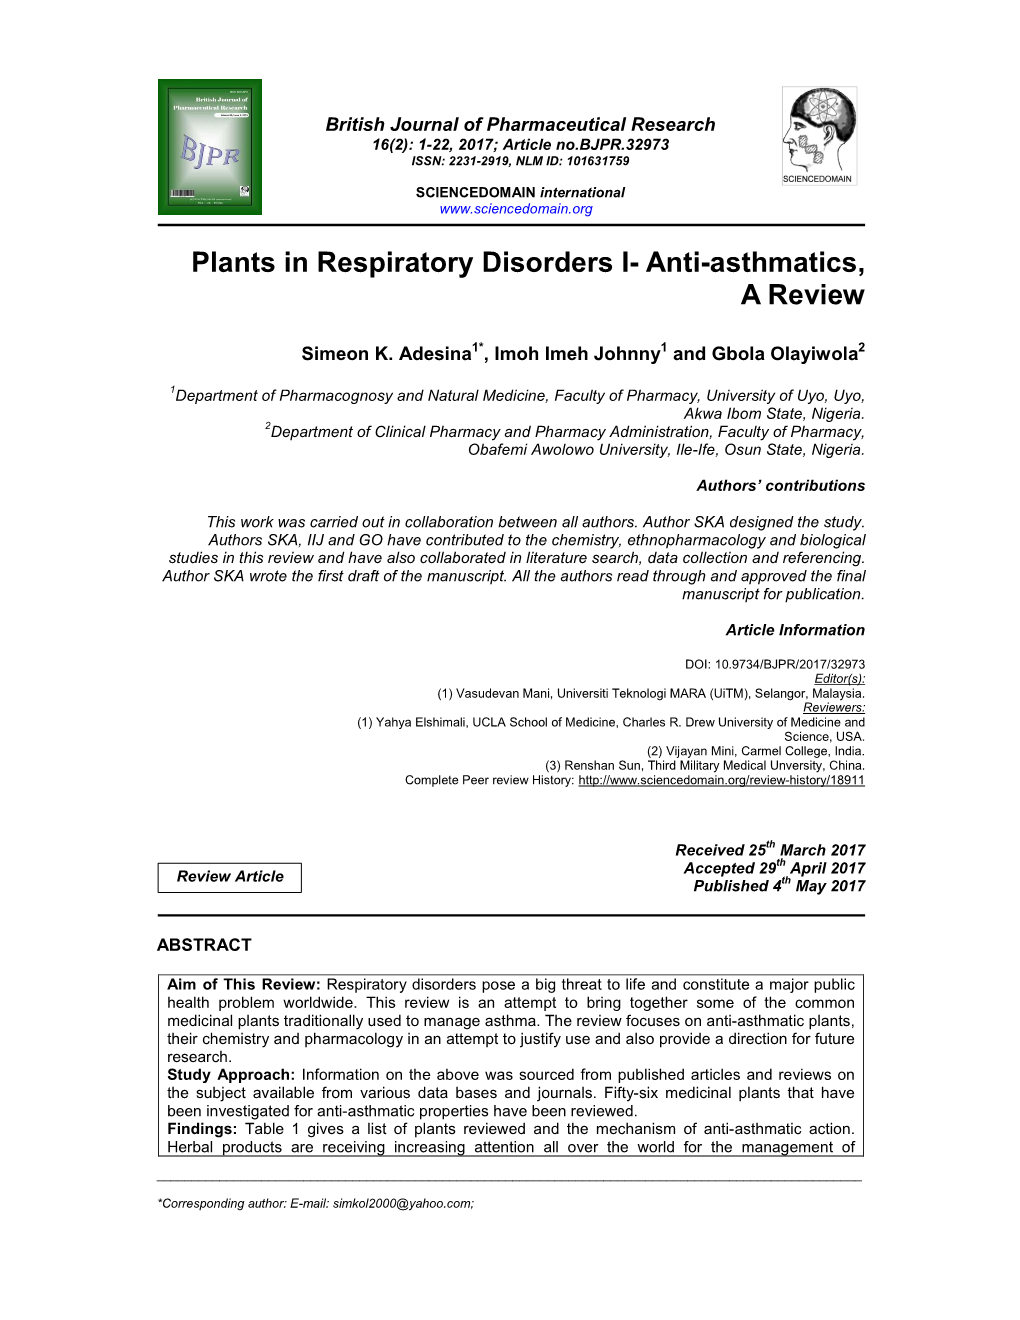 Plants in Respiratory Disorders I- Anti-Asthmatics, a Review